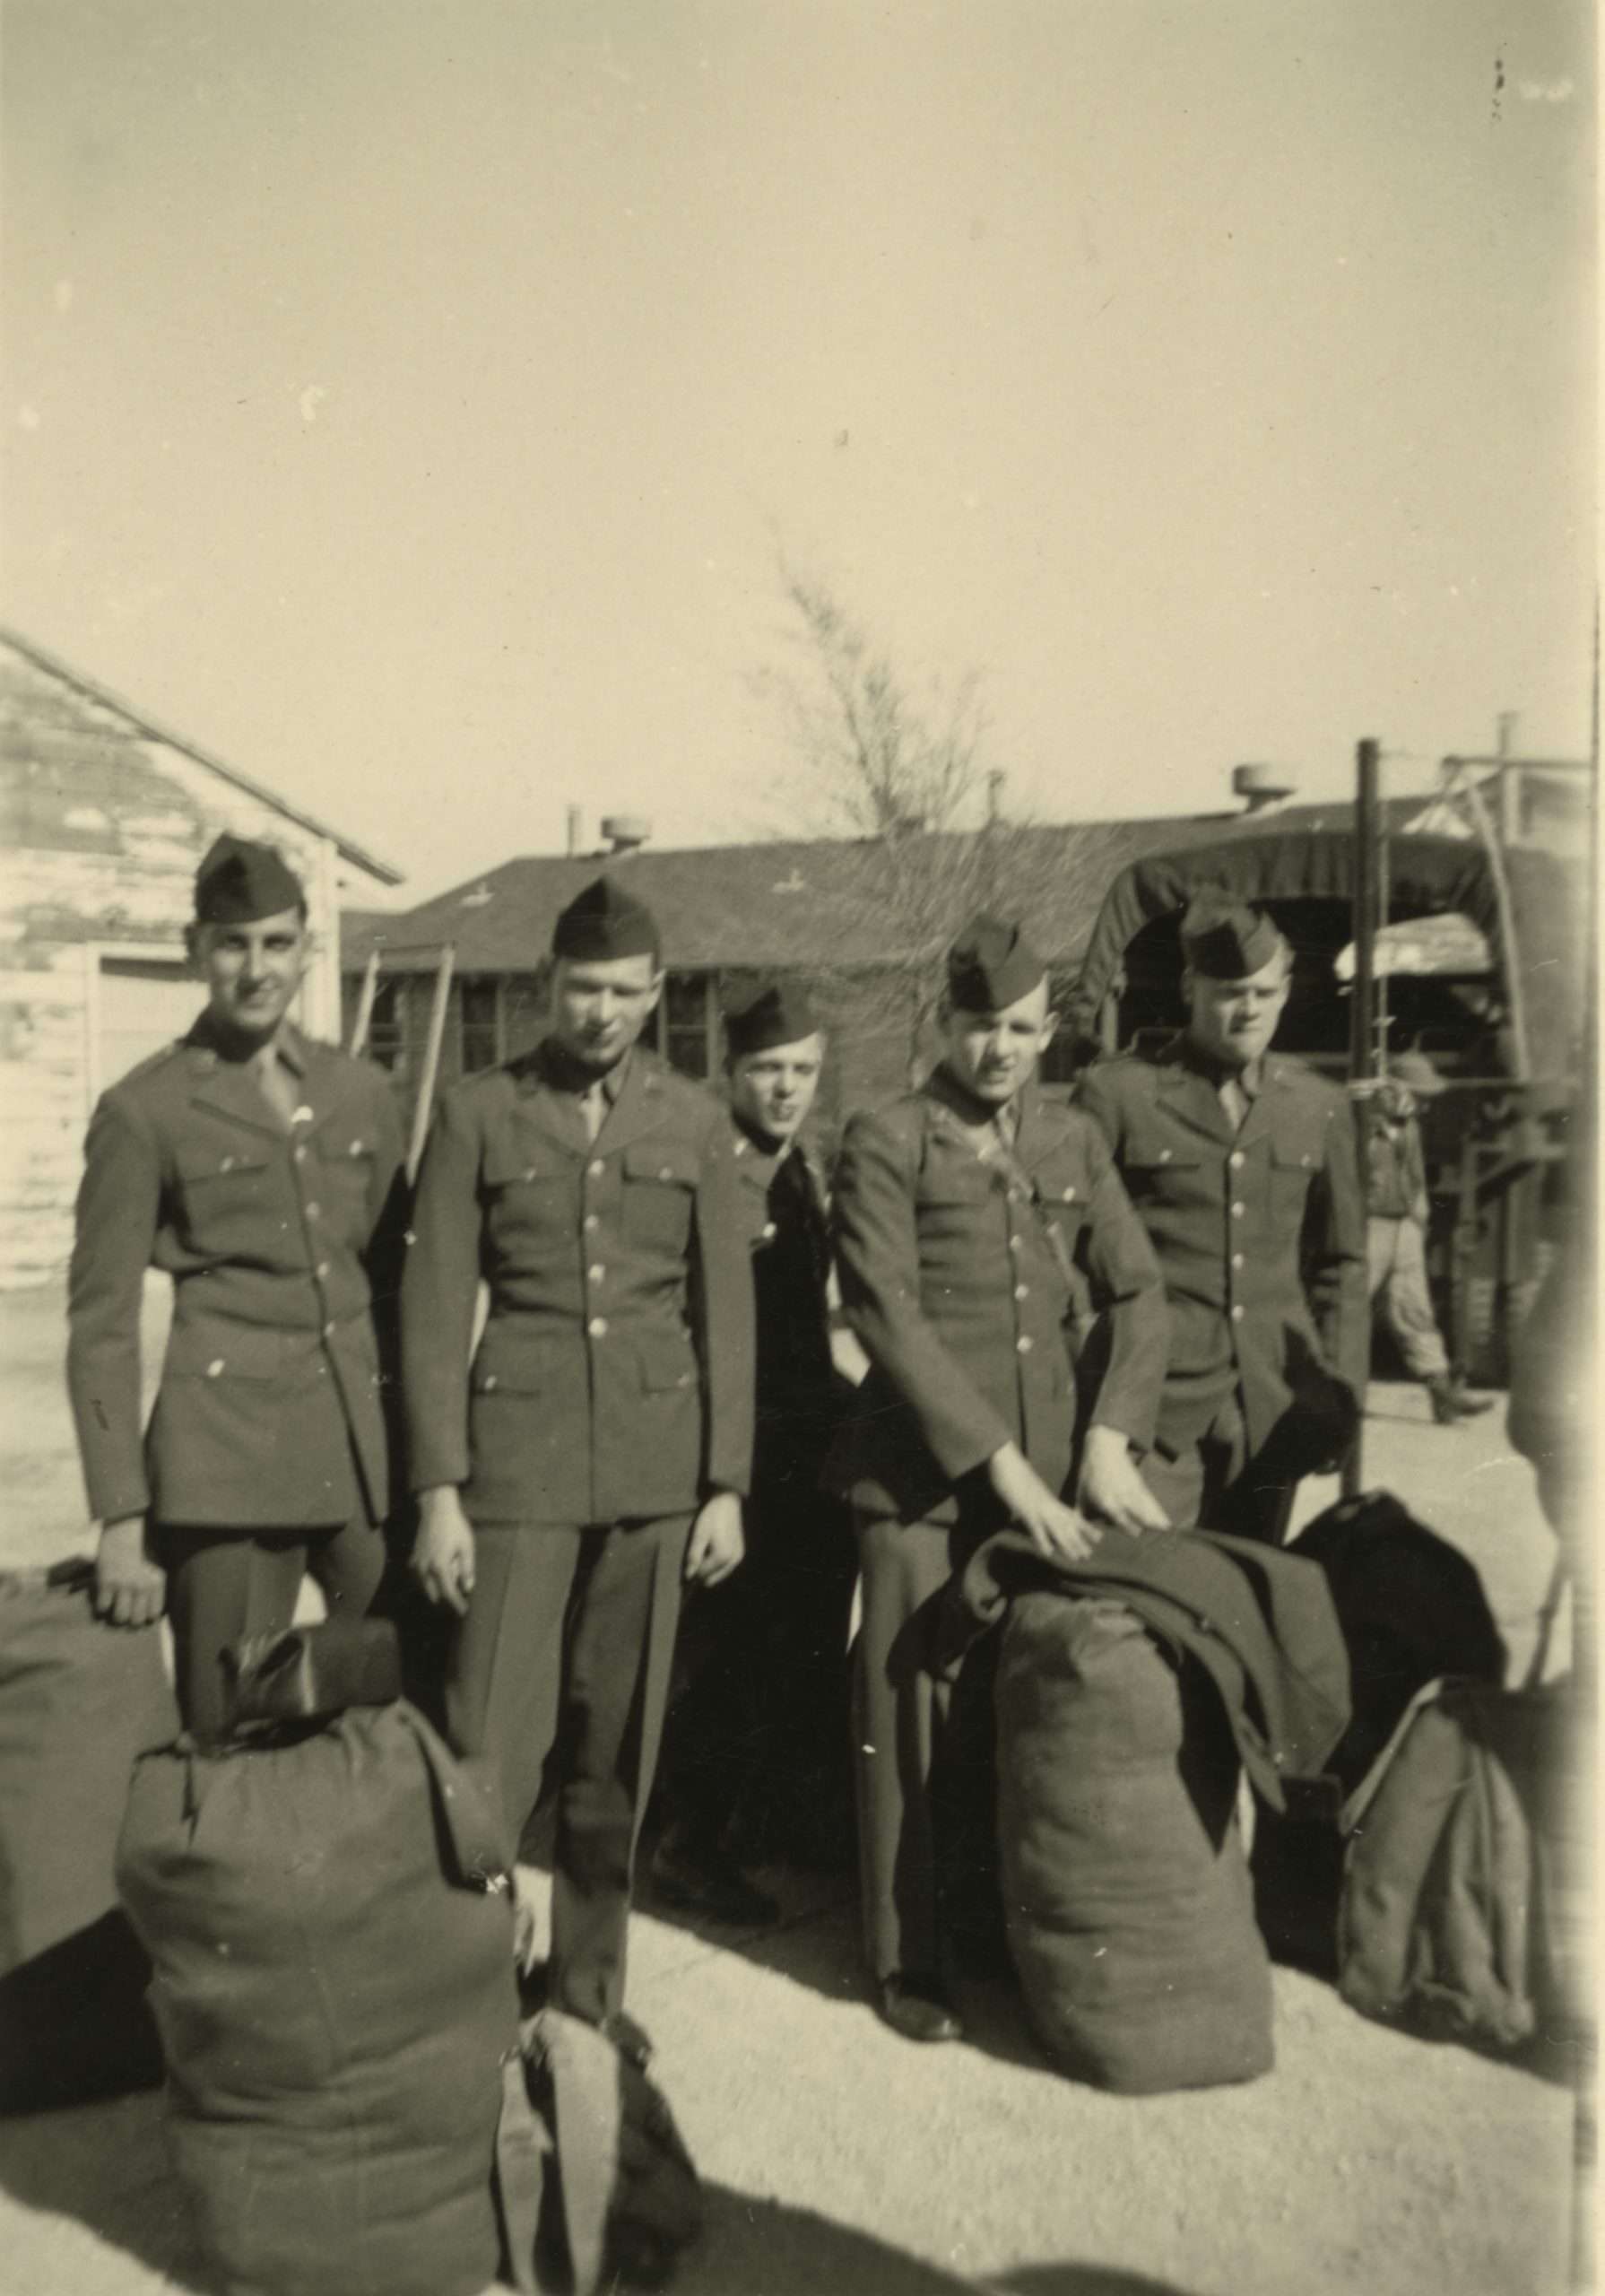 U.S. soldiers at Fort Sill, Oklahoma during WWII